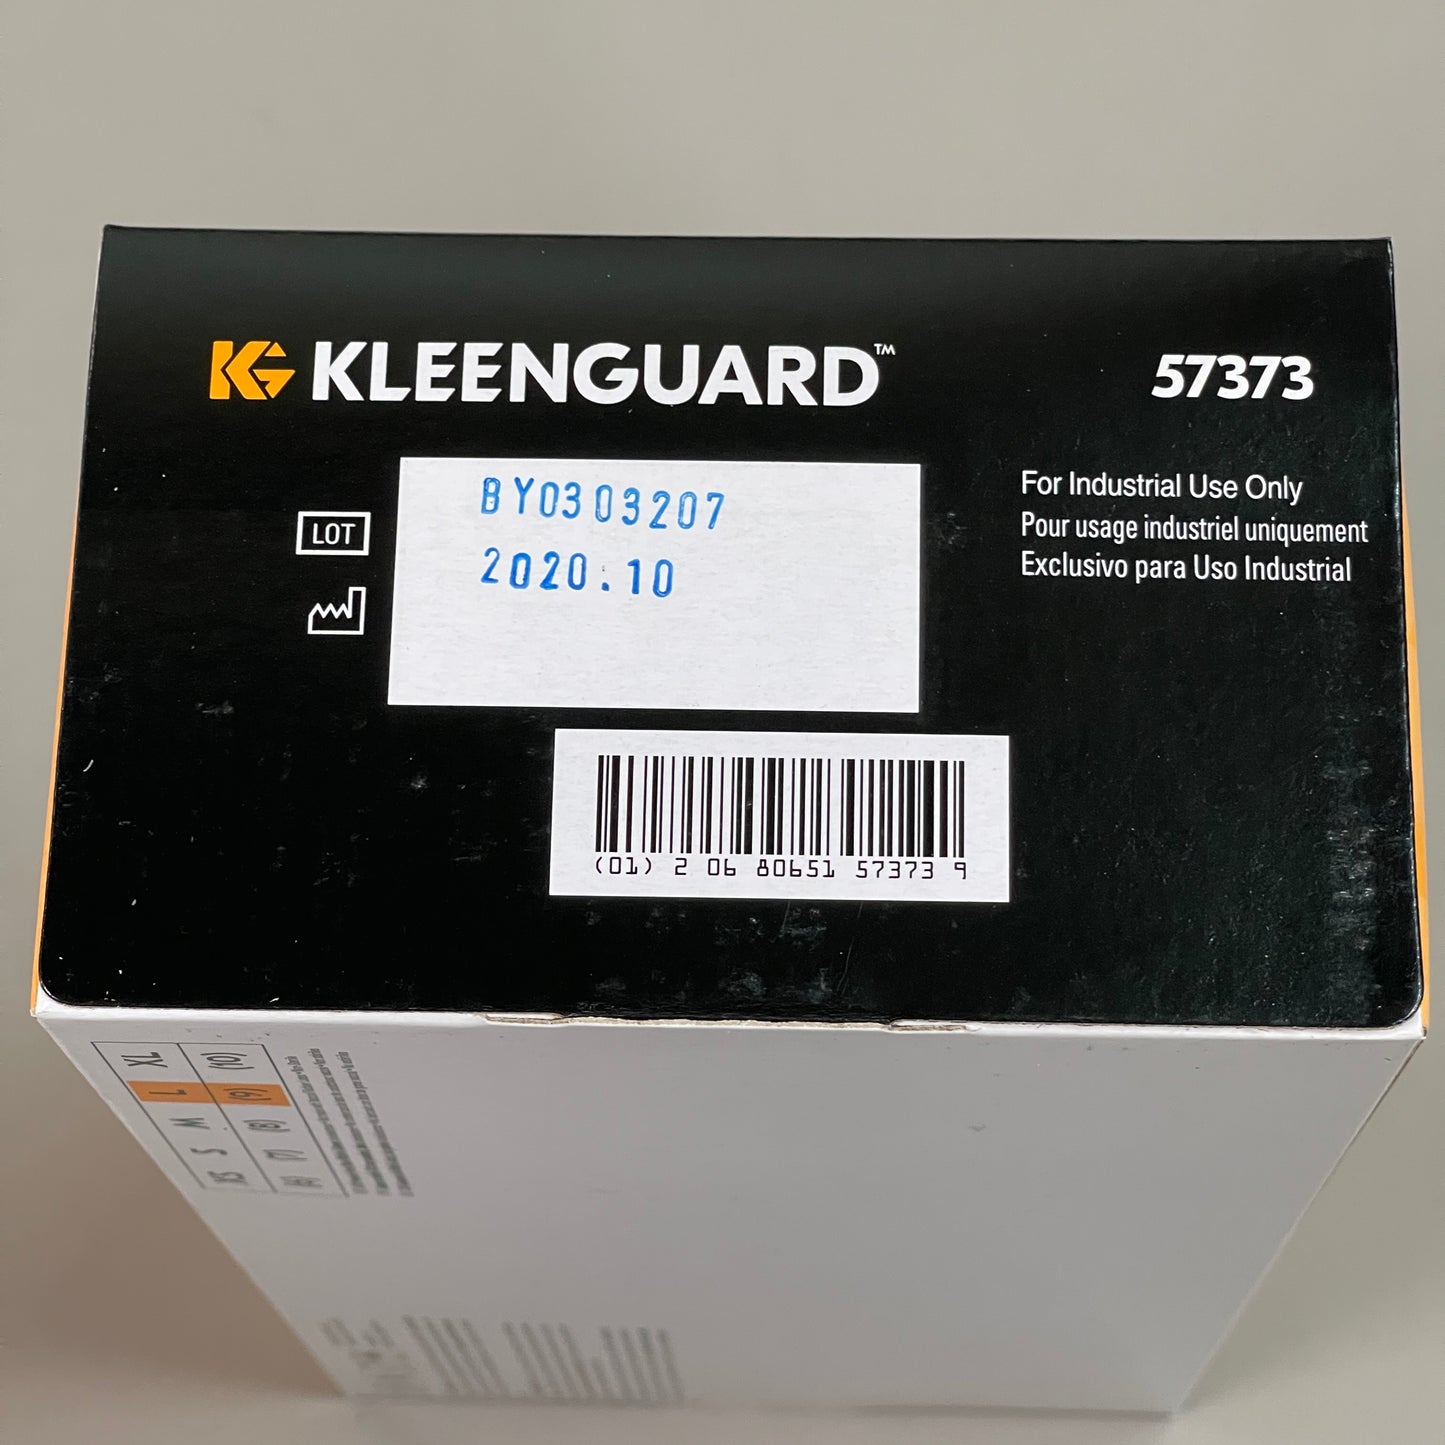 KLEENGUARD KIMBERLY-CLARK Professional Protective Nitrile Gloves 1 CASE (1000 CT) Sz L 57373 (New)